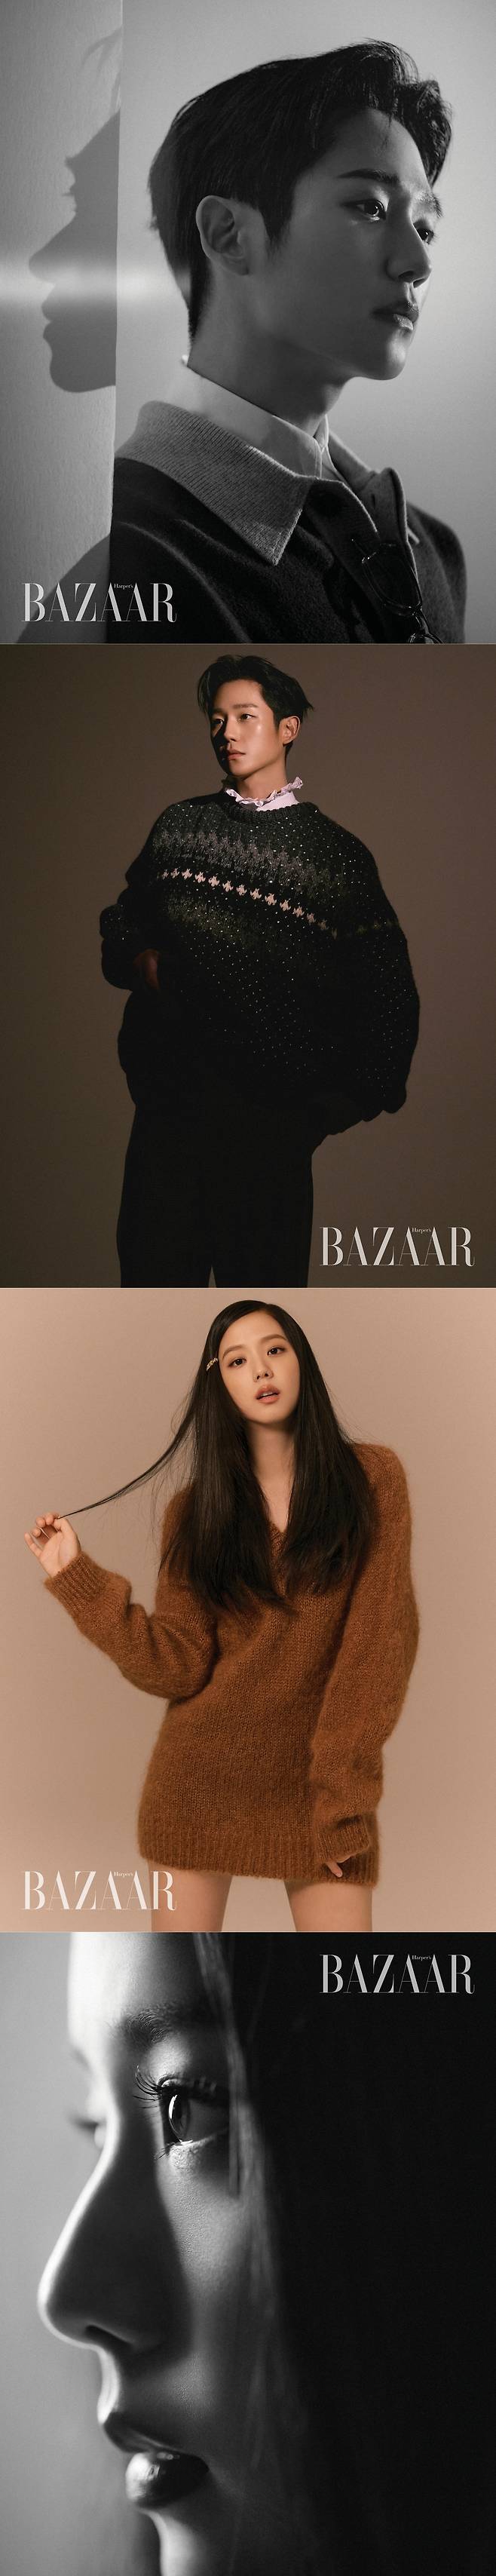 Actor Jung Hae-in and BLACKPINK JiSoo released a picture taken affectionately.Fashion magazine Harpers Bazaar released a picture with Jung Hae-in and JiSoo on November 12th.The two people who breathed as a lover who shared a love affair in the JTBC drama Snow Strengthening showed perfect breathing in this lyrical mood picture.In an interview after the filming, Jung Hae-in said, The biggest reason for choosing this work was the article.There was the power of writing, the power of stories, and the infinite trust in the writer and the director.JiSoo said, The world of Youngro and JiSoo is so different that there is no confusion.I was so grateful to the staff for being able to concentrate on Youngro, because everyone treated me as Youngro, not JiSoo, from the moment I arrived at the drama theater.Both of them expressed their expectations about their first episode, and Jung Hae-in said, The Snow Strengthening is the most dramatic work that has been hit by the wall.I think I felt that there was nothing I could do alone, but I was so willing to do it to the coach and Mr. JiSoo, as well as each of the staff.So I think I will watch the first broadcast with a trembling mind more than ever. JiSoo said, The members said they would use the main show. They always cheered me up because they were so often in touch during filming.Im so excited that Im going to work harder because Im so curious about the members. (Im not sure who Im going to watch the first broadcast with. I want to see it alone at home, but I dont know what will happen.I think I can only see through a tiny gap between my fingers, covering my eyes.Jung Hae-in, JiSoo Interview with the pictorial will be released in the December issue of Harpers Bazaar.